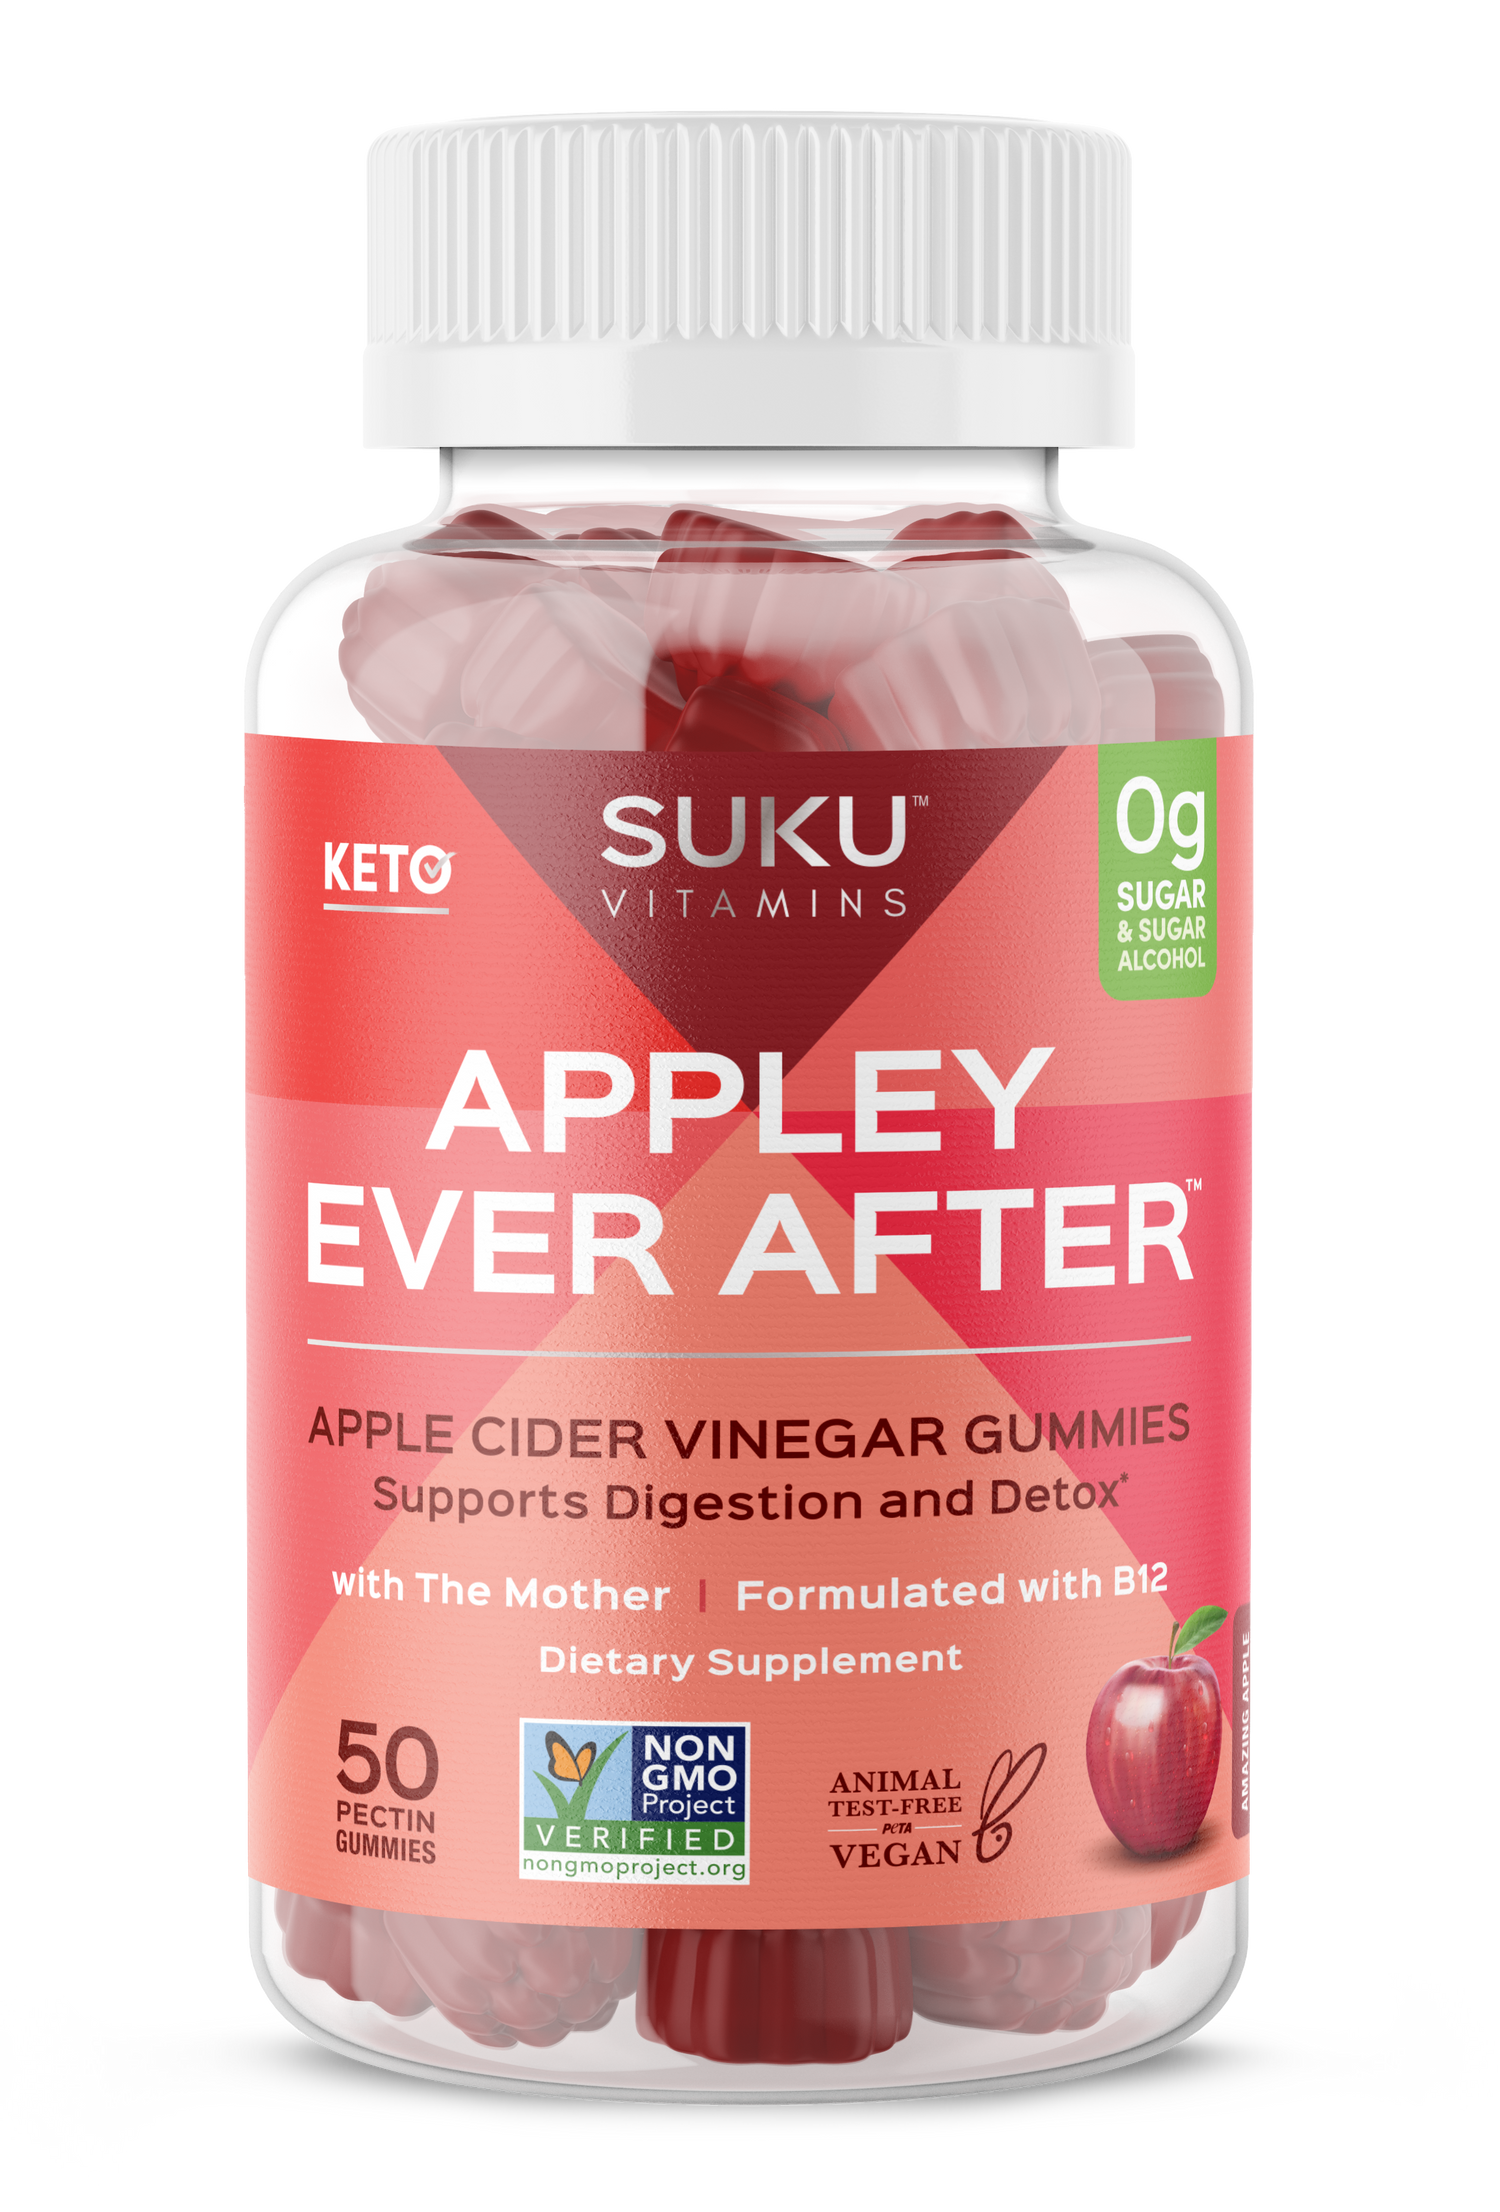 Appley Ever After™